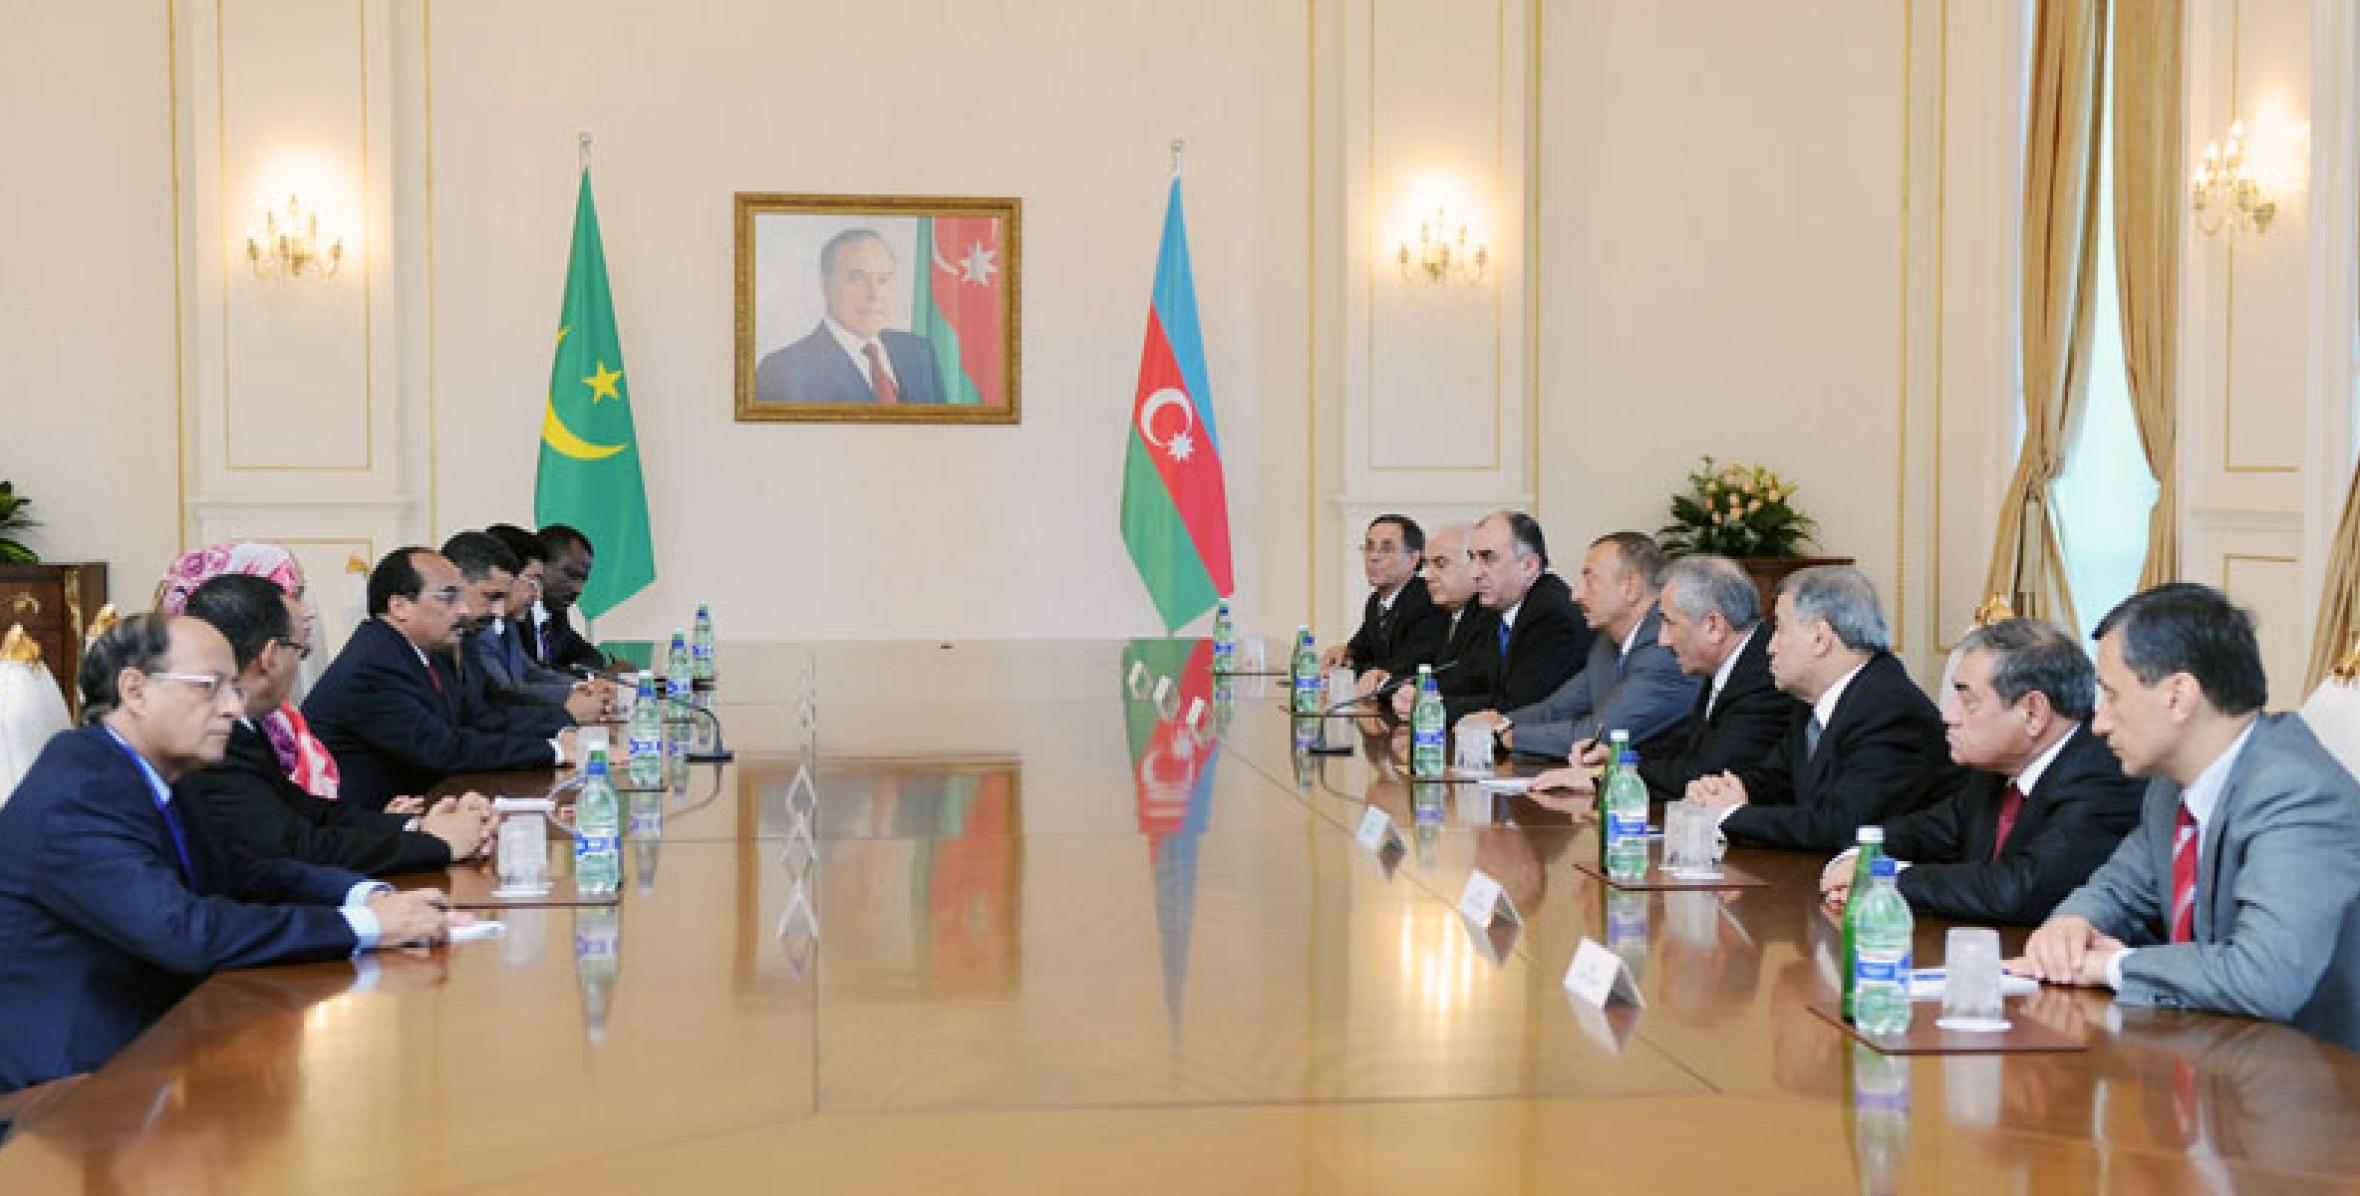 Presidents of Azerbaijan and Mauritania held talks in an expanded format